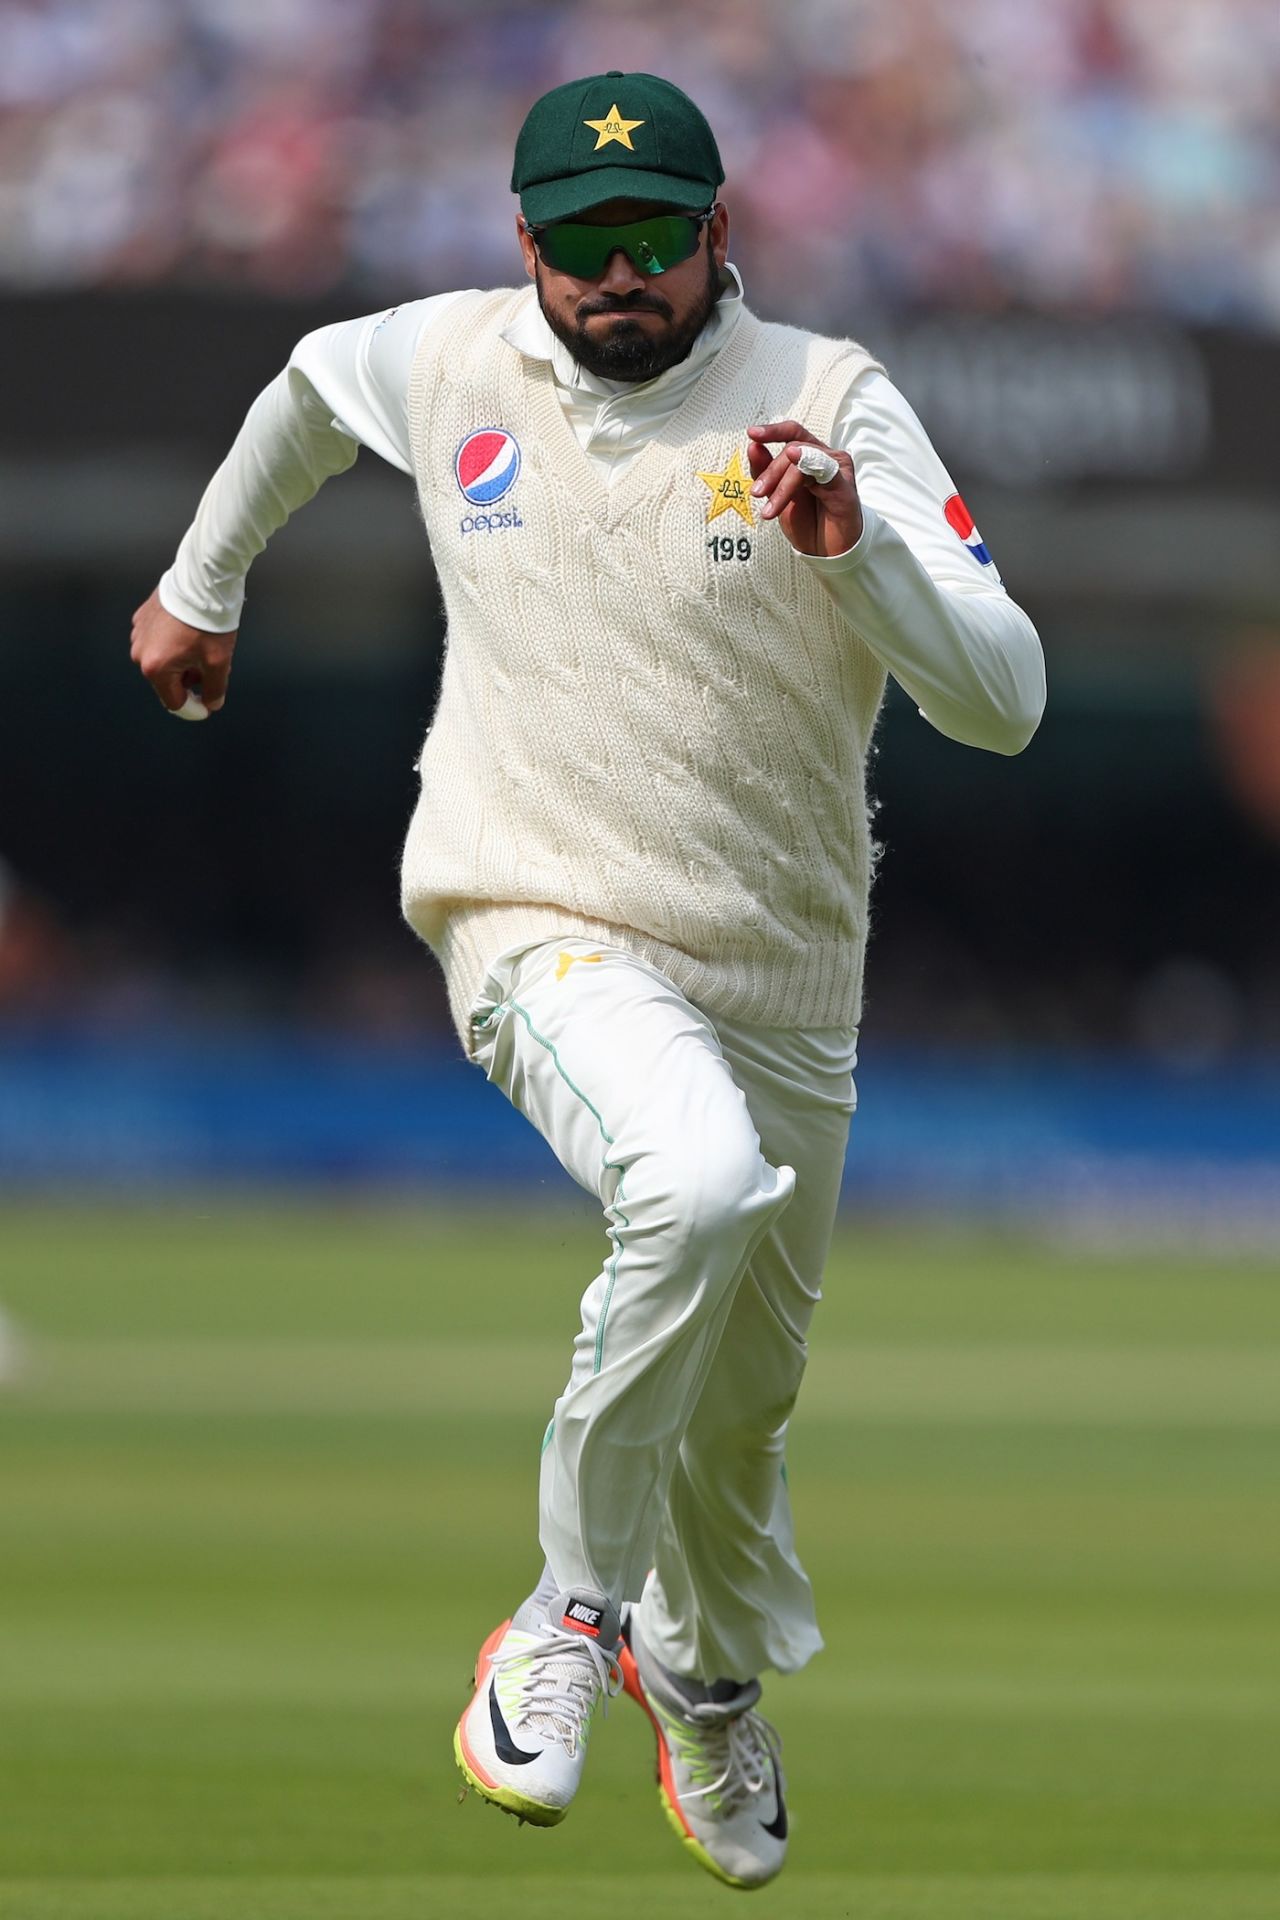 Azhar Ali of Pakistan pursues the ball, First NatWest Test match, England v Pakistan, Lord's Cricket Ground, May 24, 2018, London, England.